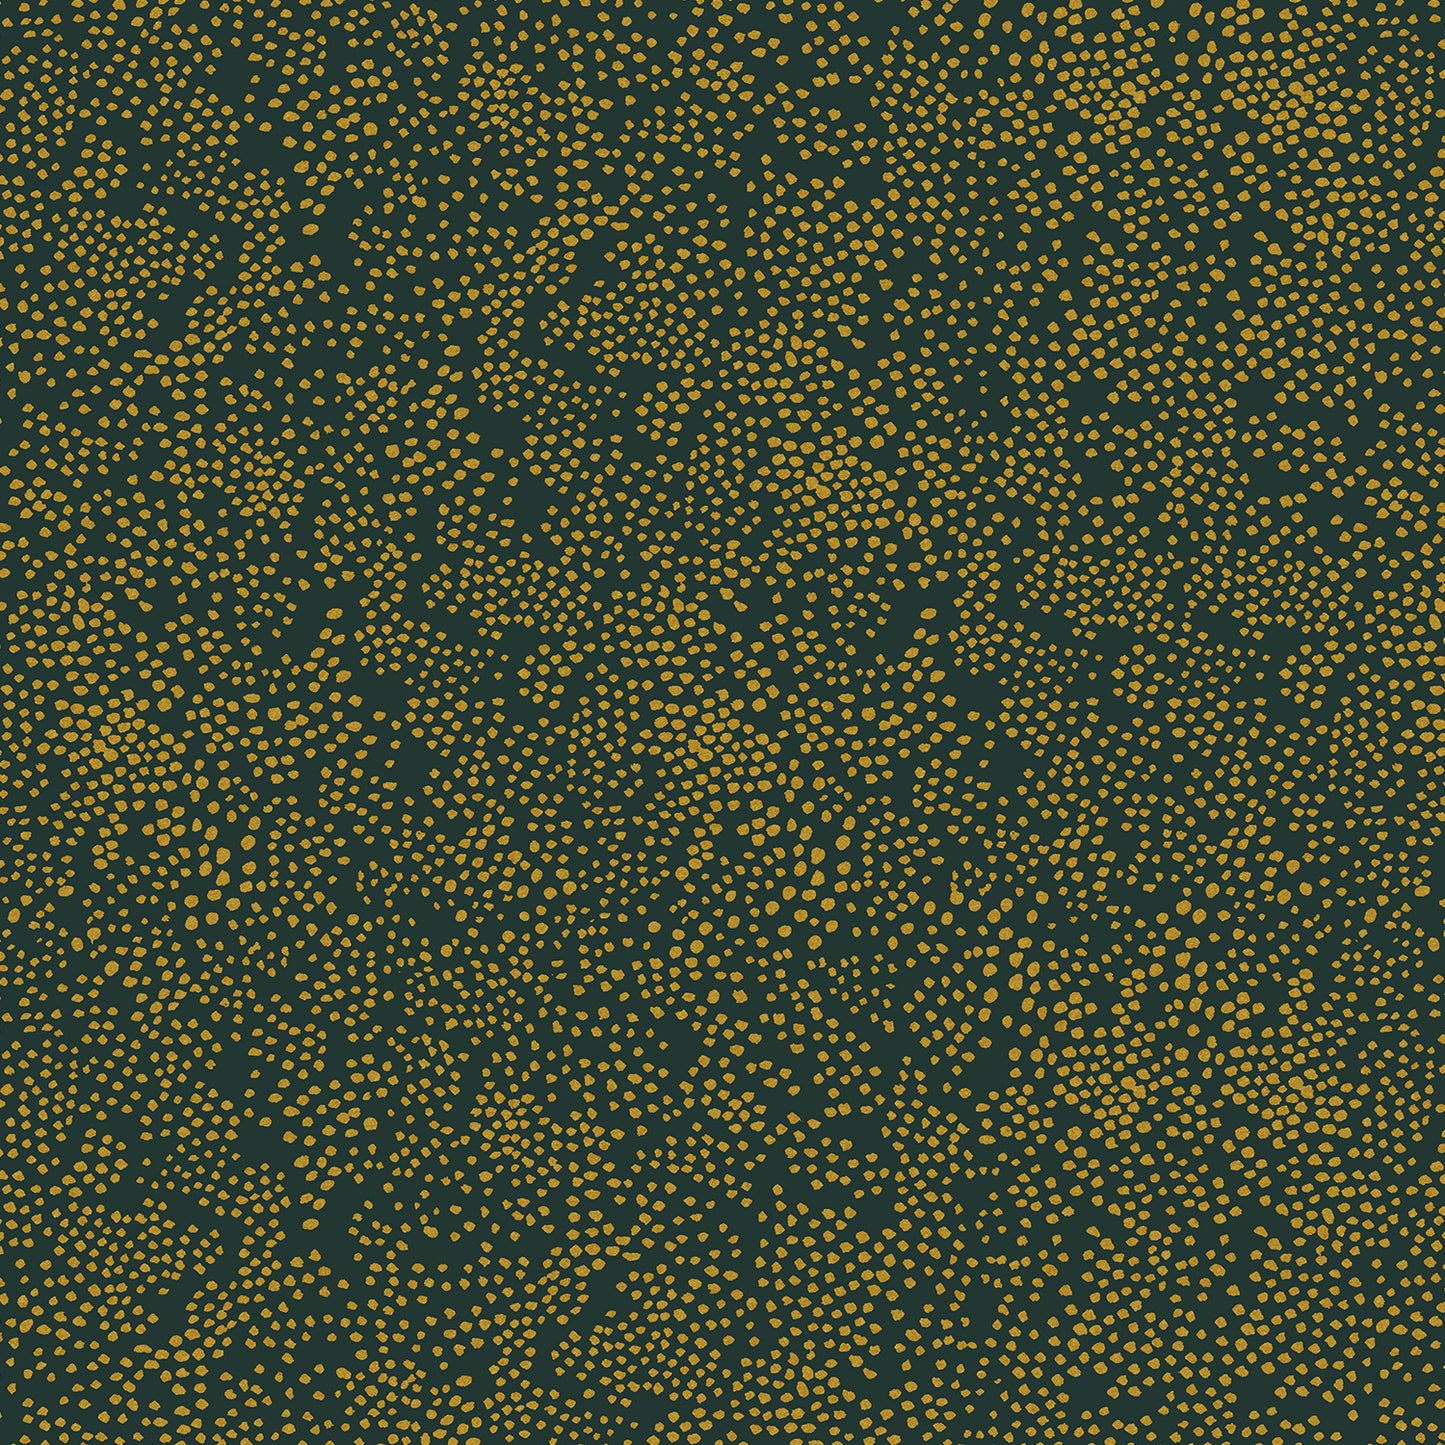 Manufacturer: RJR Fabrics Designer: Rifle Paper Co. Collection: Rifle Paper Co. Basics Print Name: Menagerie Champagne in Evergreen Metallic Material: 100% Cotton Weight: Quilting  SKU: RP502-EV5M Width: 44 inches